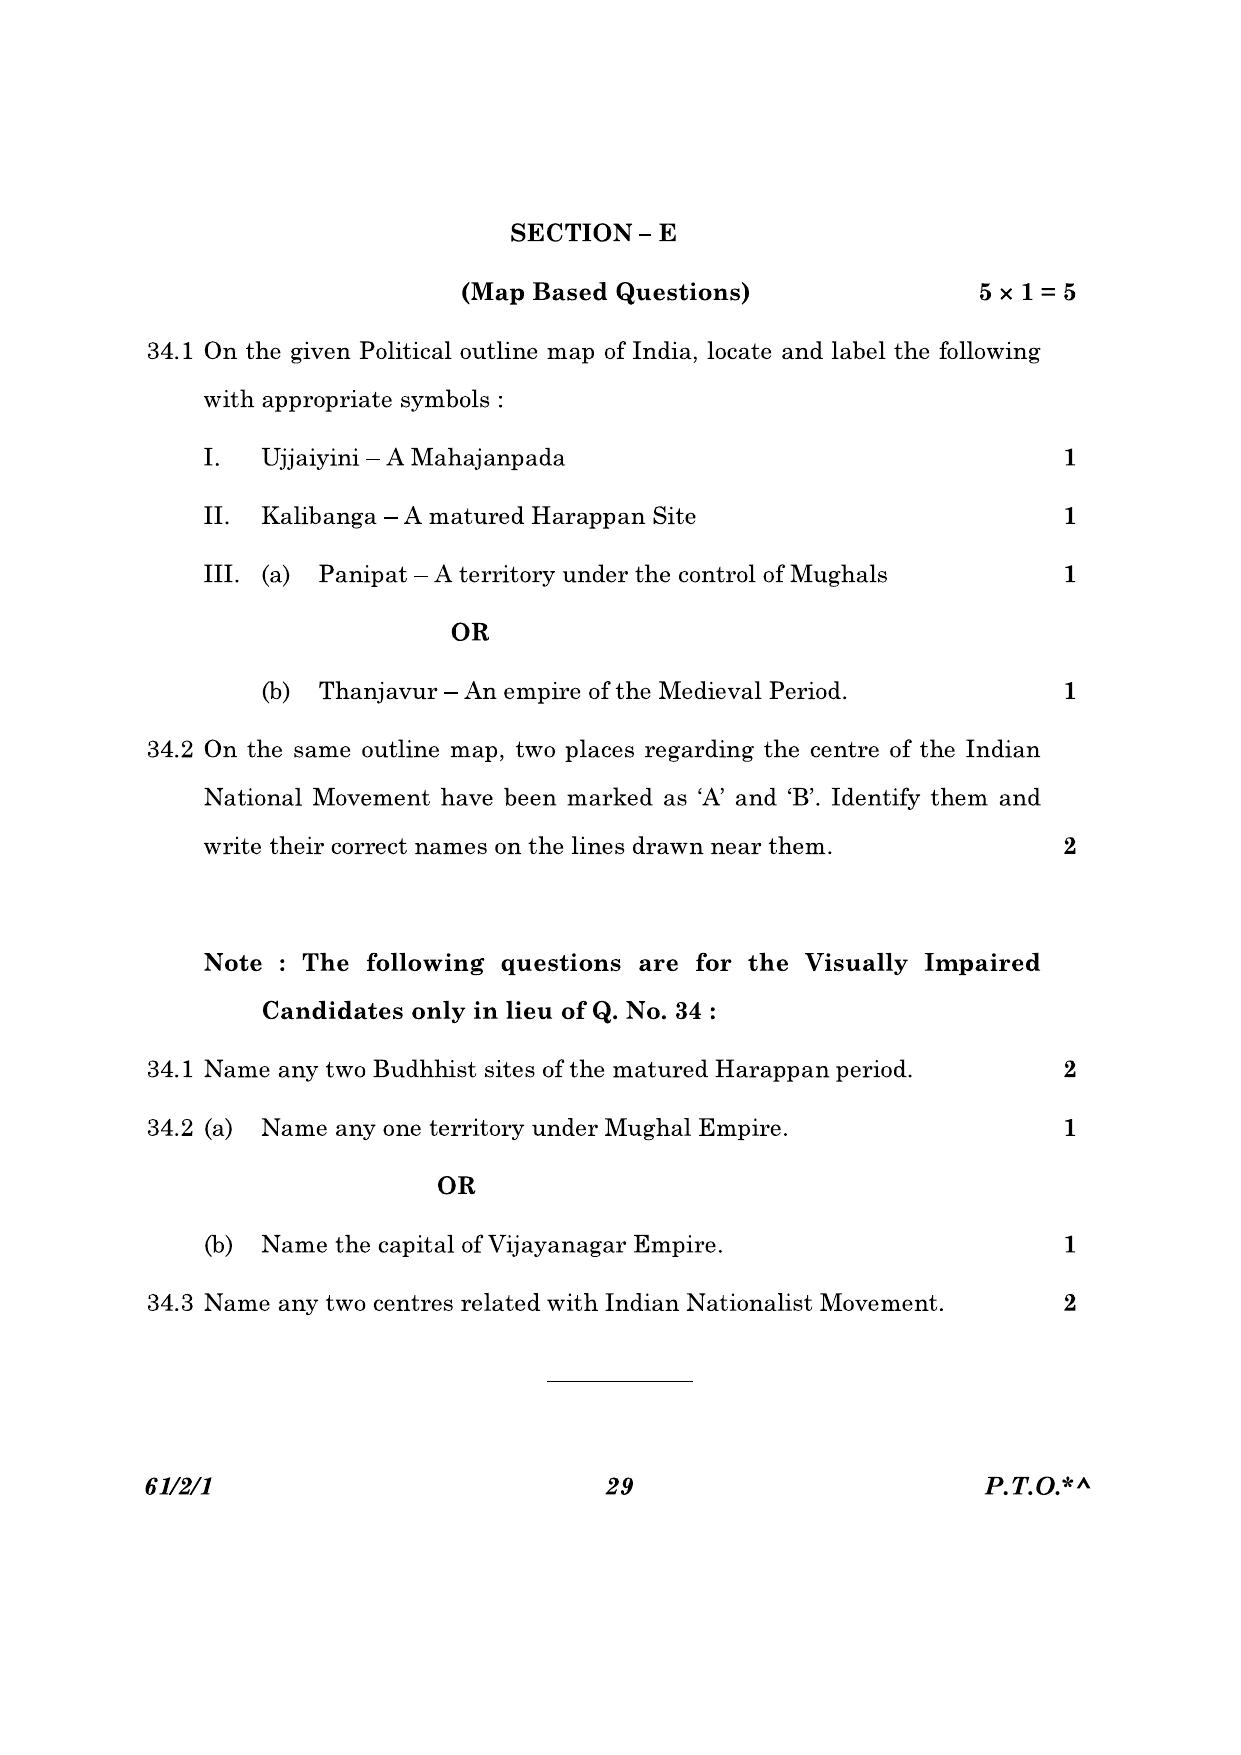 CBSE Class 12 61-2-1 History 2023 Question Paper - Page 29